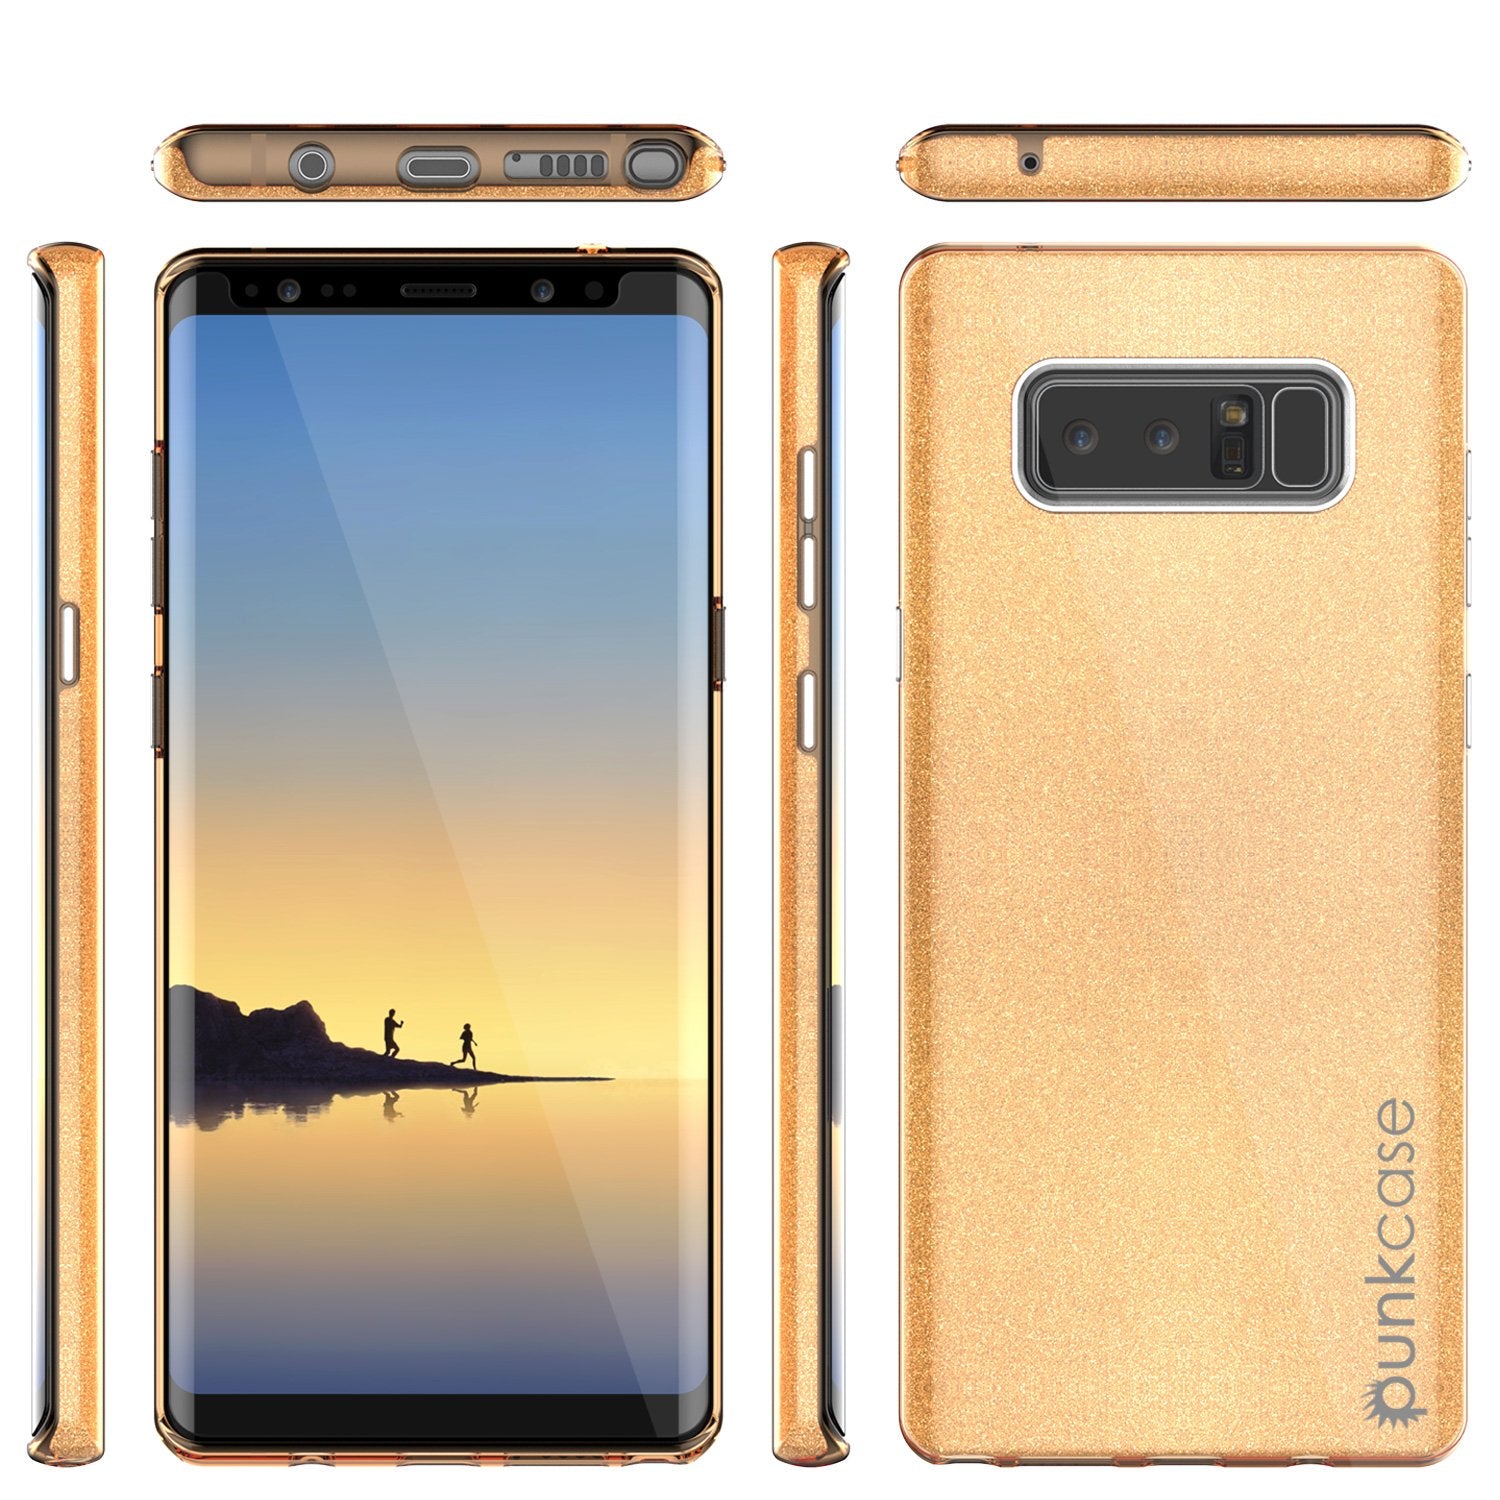 Galaxy Note 8 Case, Punkcase Galactic 2.0 Series Ultra Slim Protective Armor [Gold] - PunkCase NZ